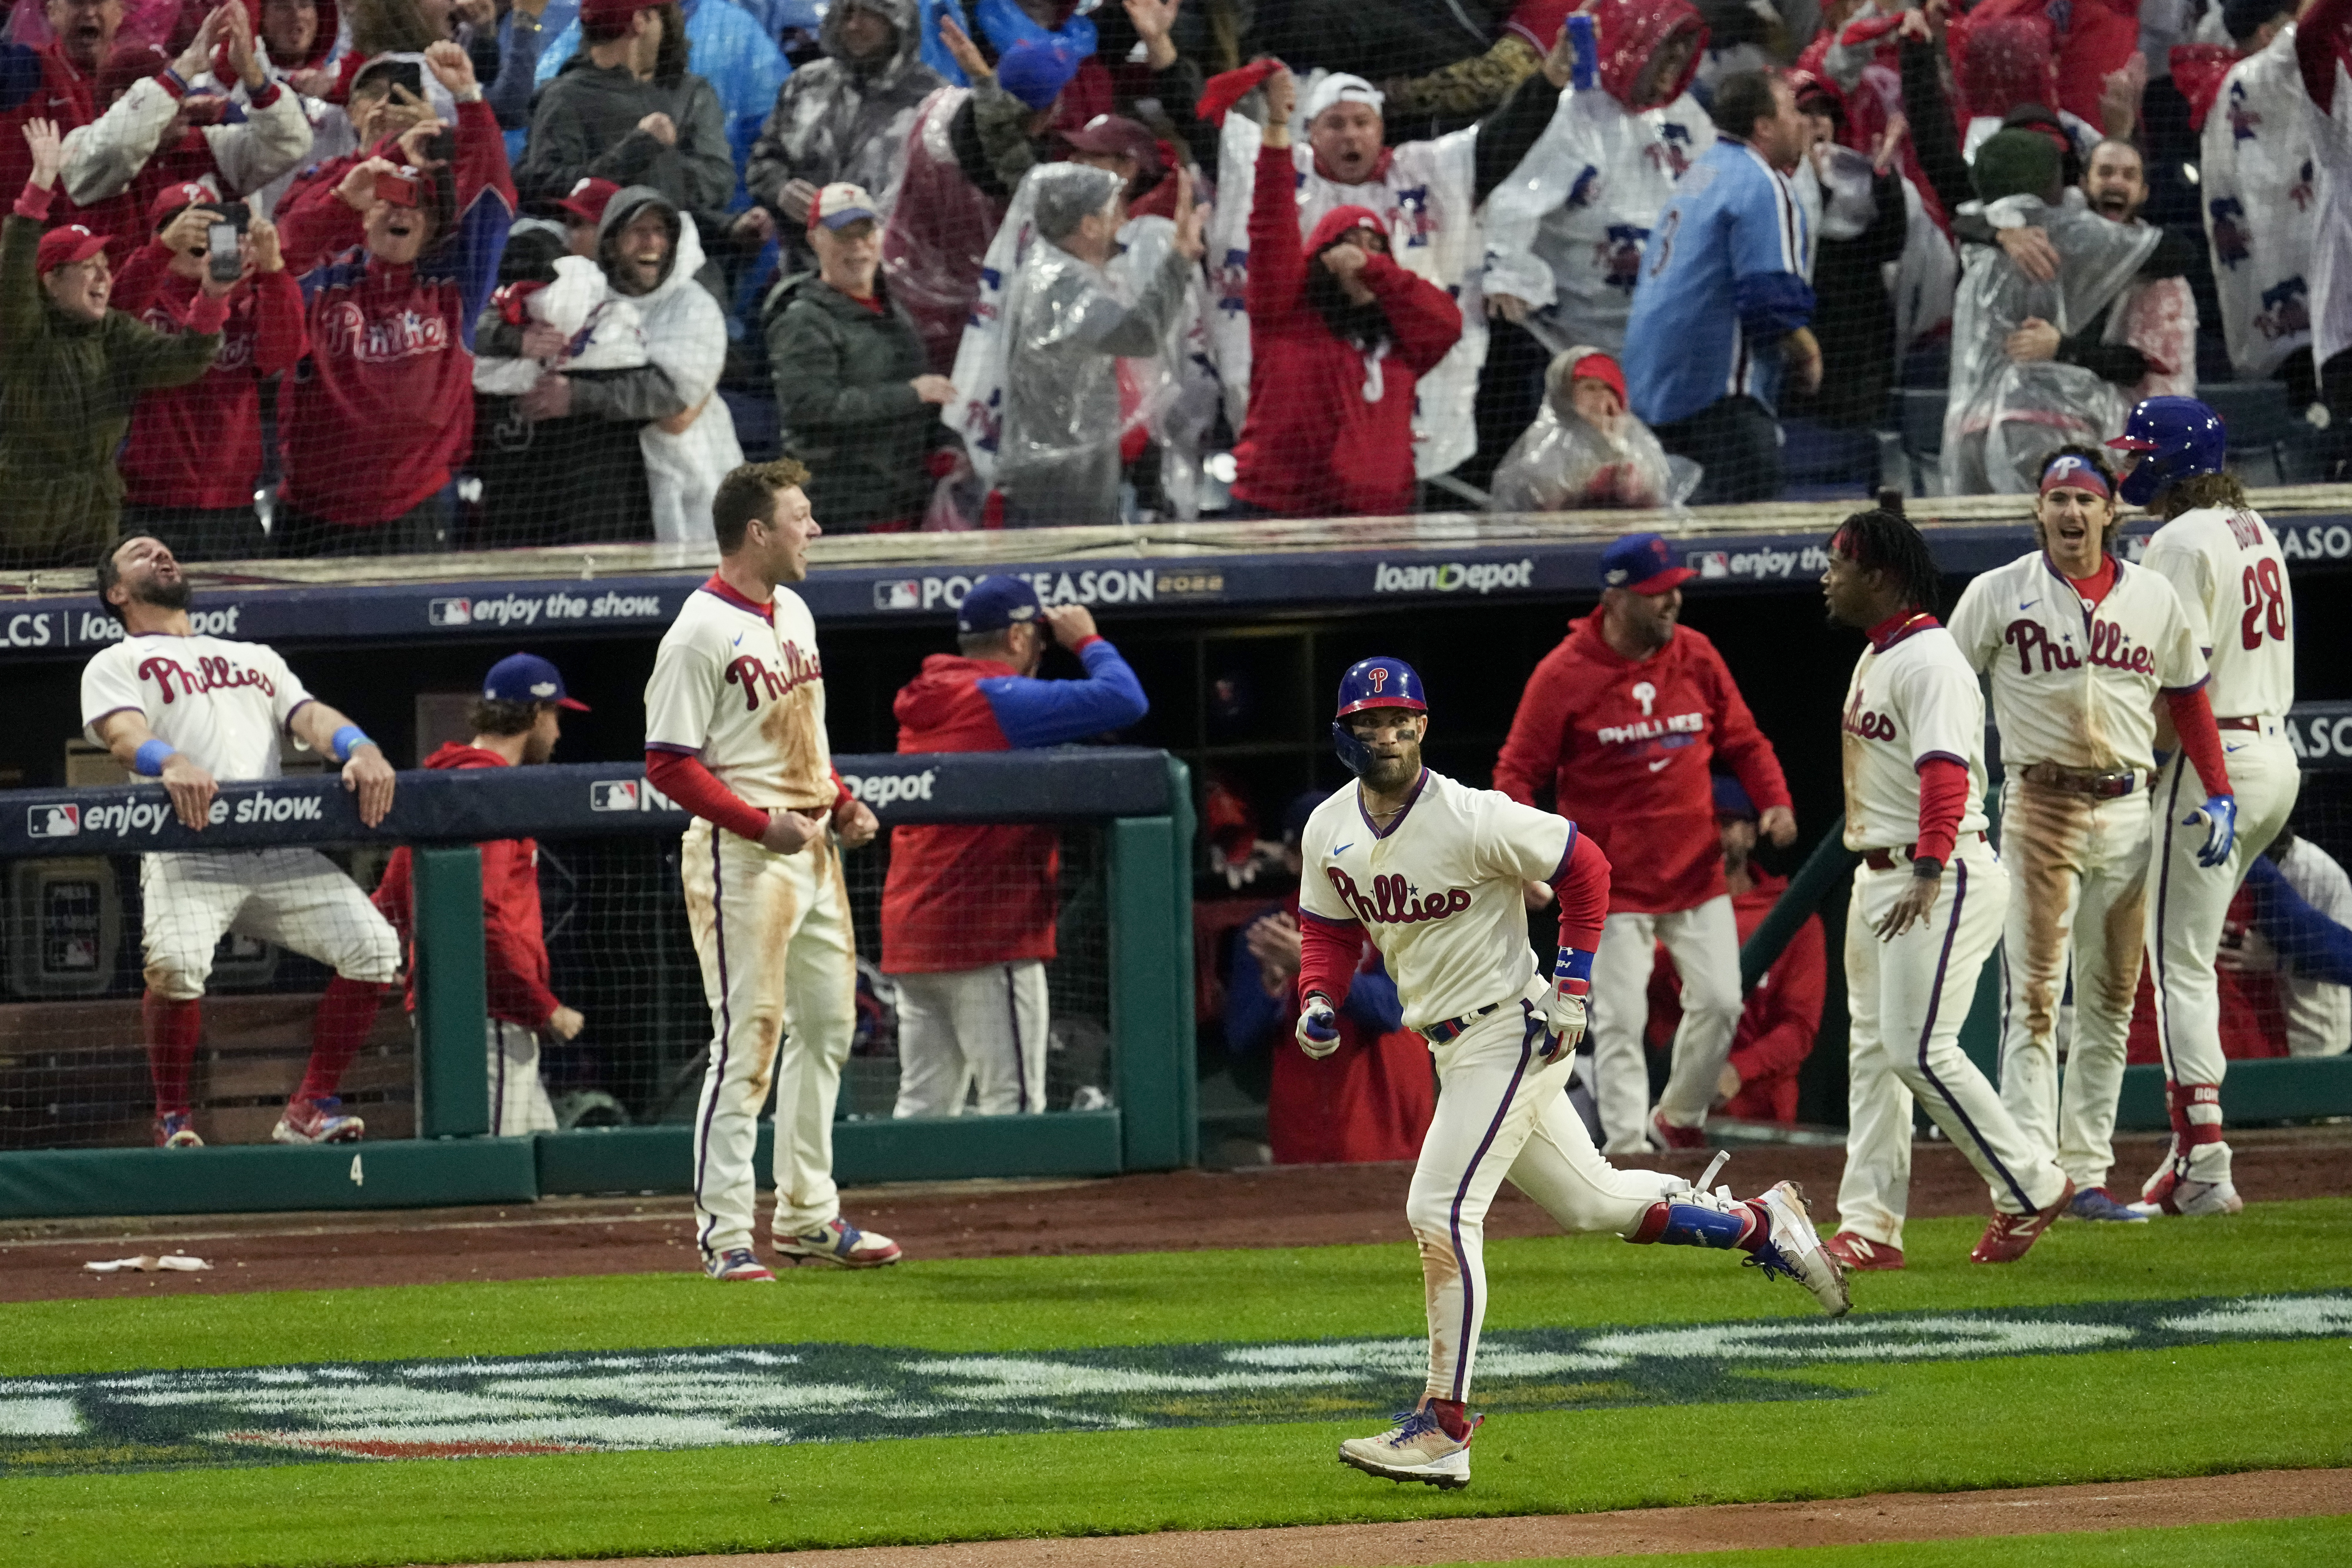 Nationals 2-1 over Phillies on Bryce Harper walk-off double after Mets  clinch NL East - Federal Baseball